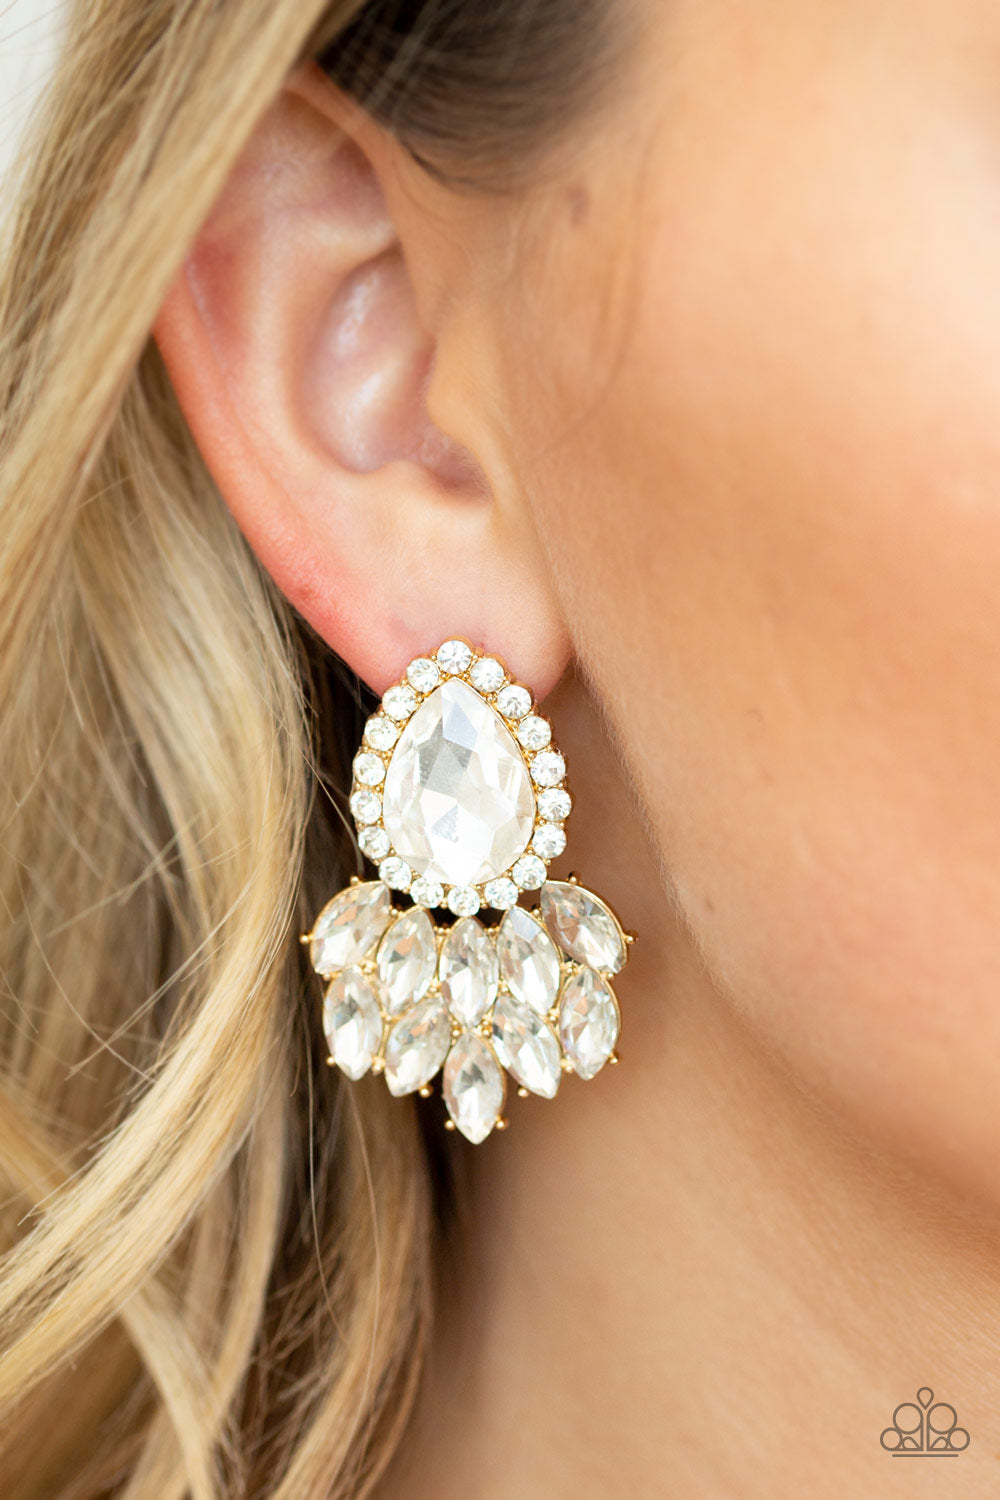 Paparazzi A Breath of Fresh HEIR - Gold - White Rhinestones and Gems - Post Earrings - $5 Jewelry with Ashley Swint